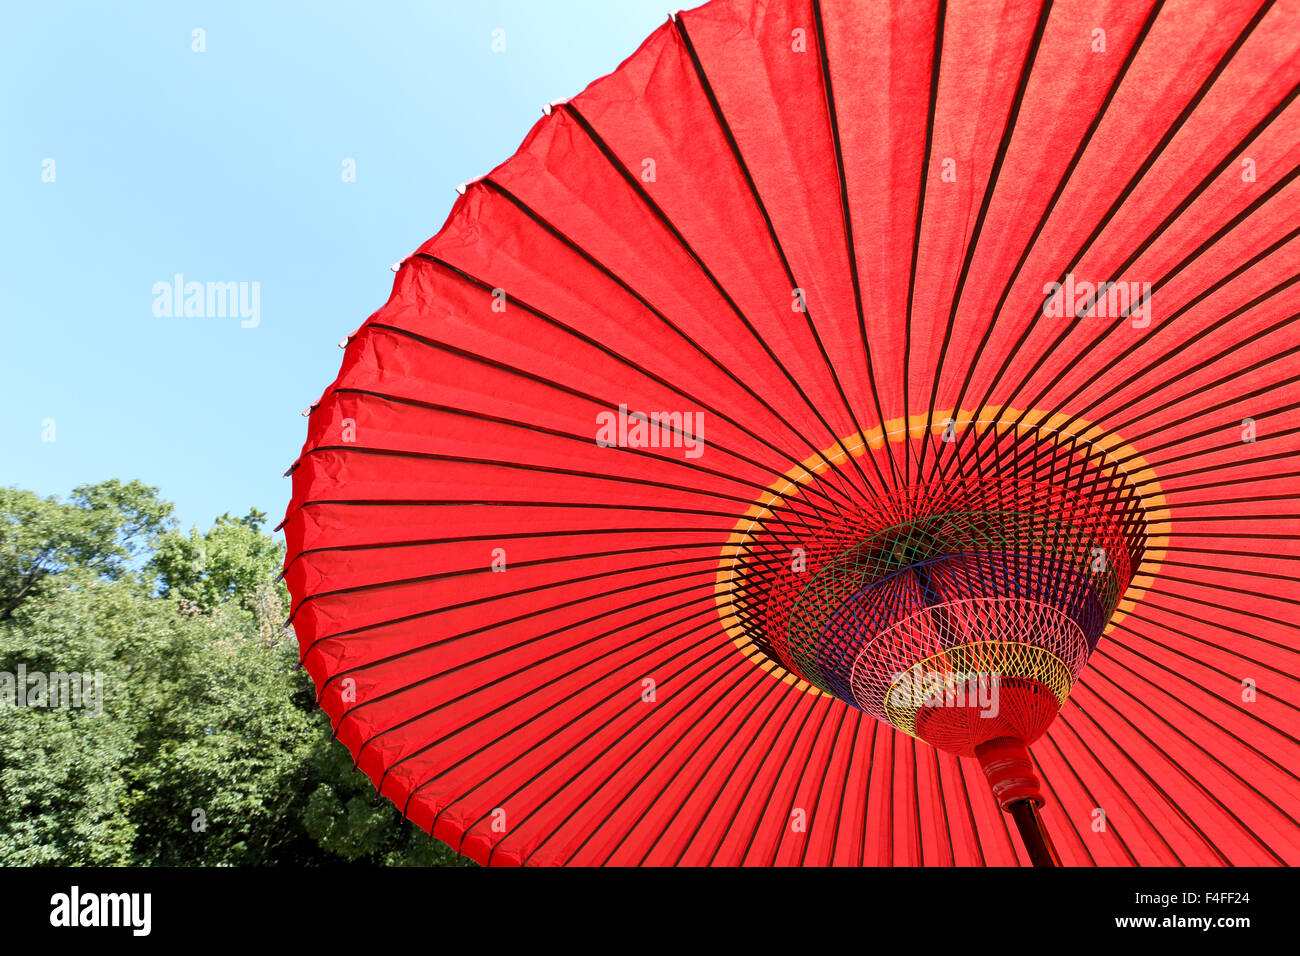 Japanese red umbrella against the blue sky Stock Photo